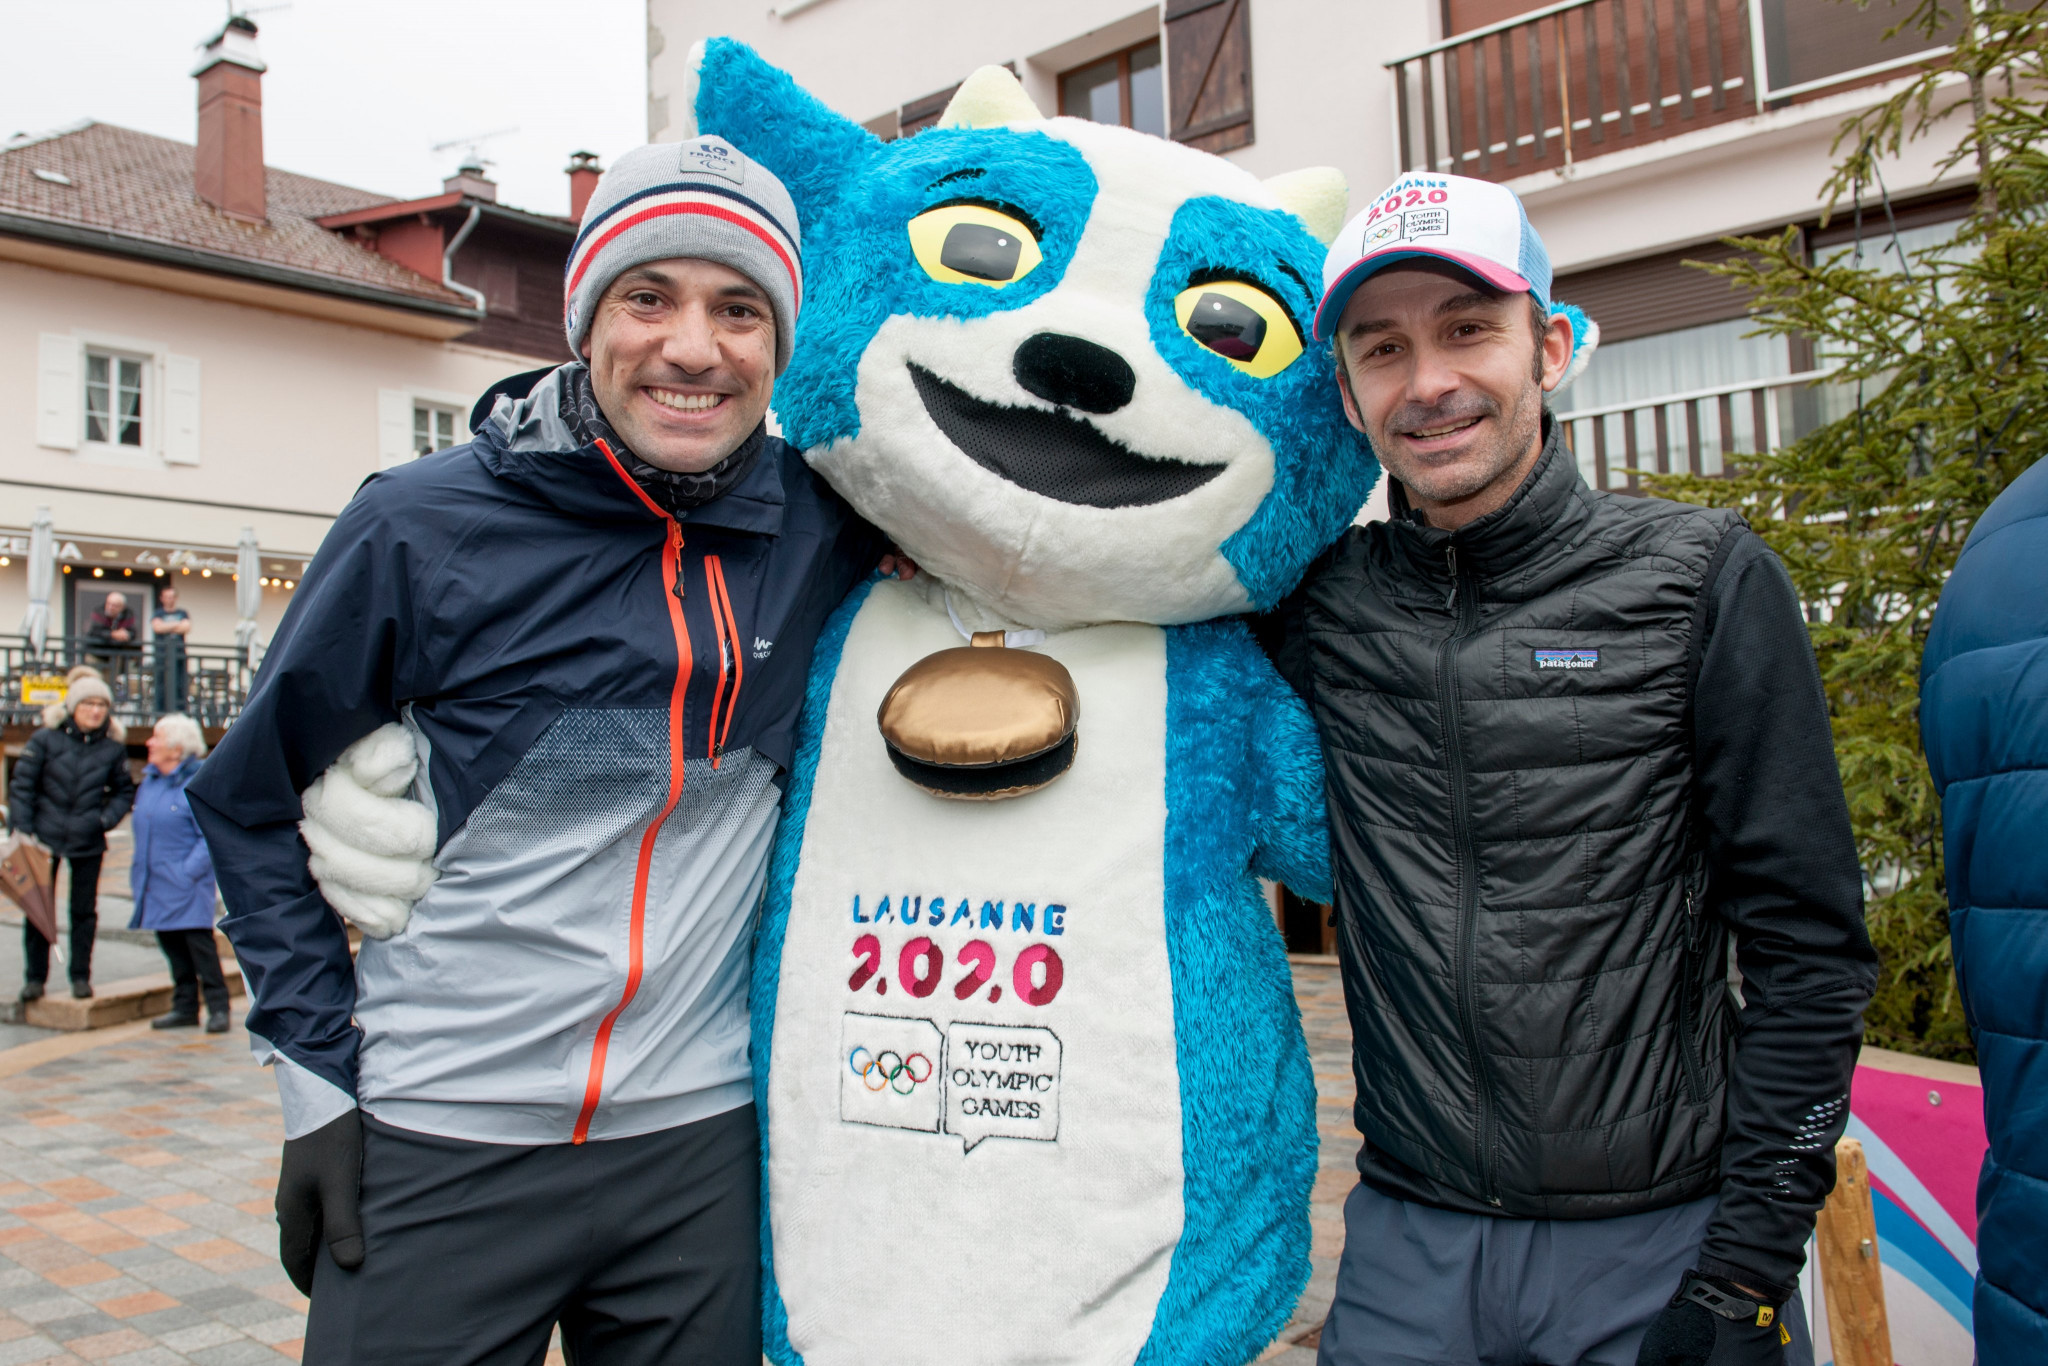 Lausanne 2020 is just four days away from beginning with the Opening Ceremony ©Lausanne 2020